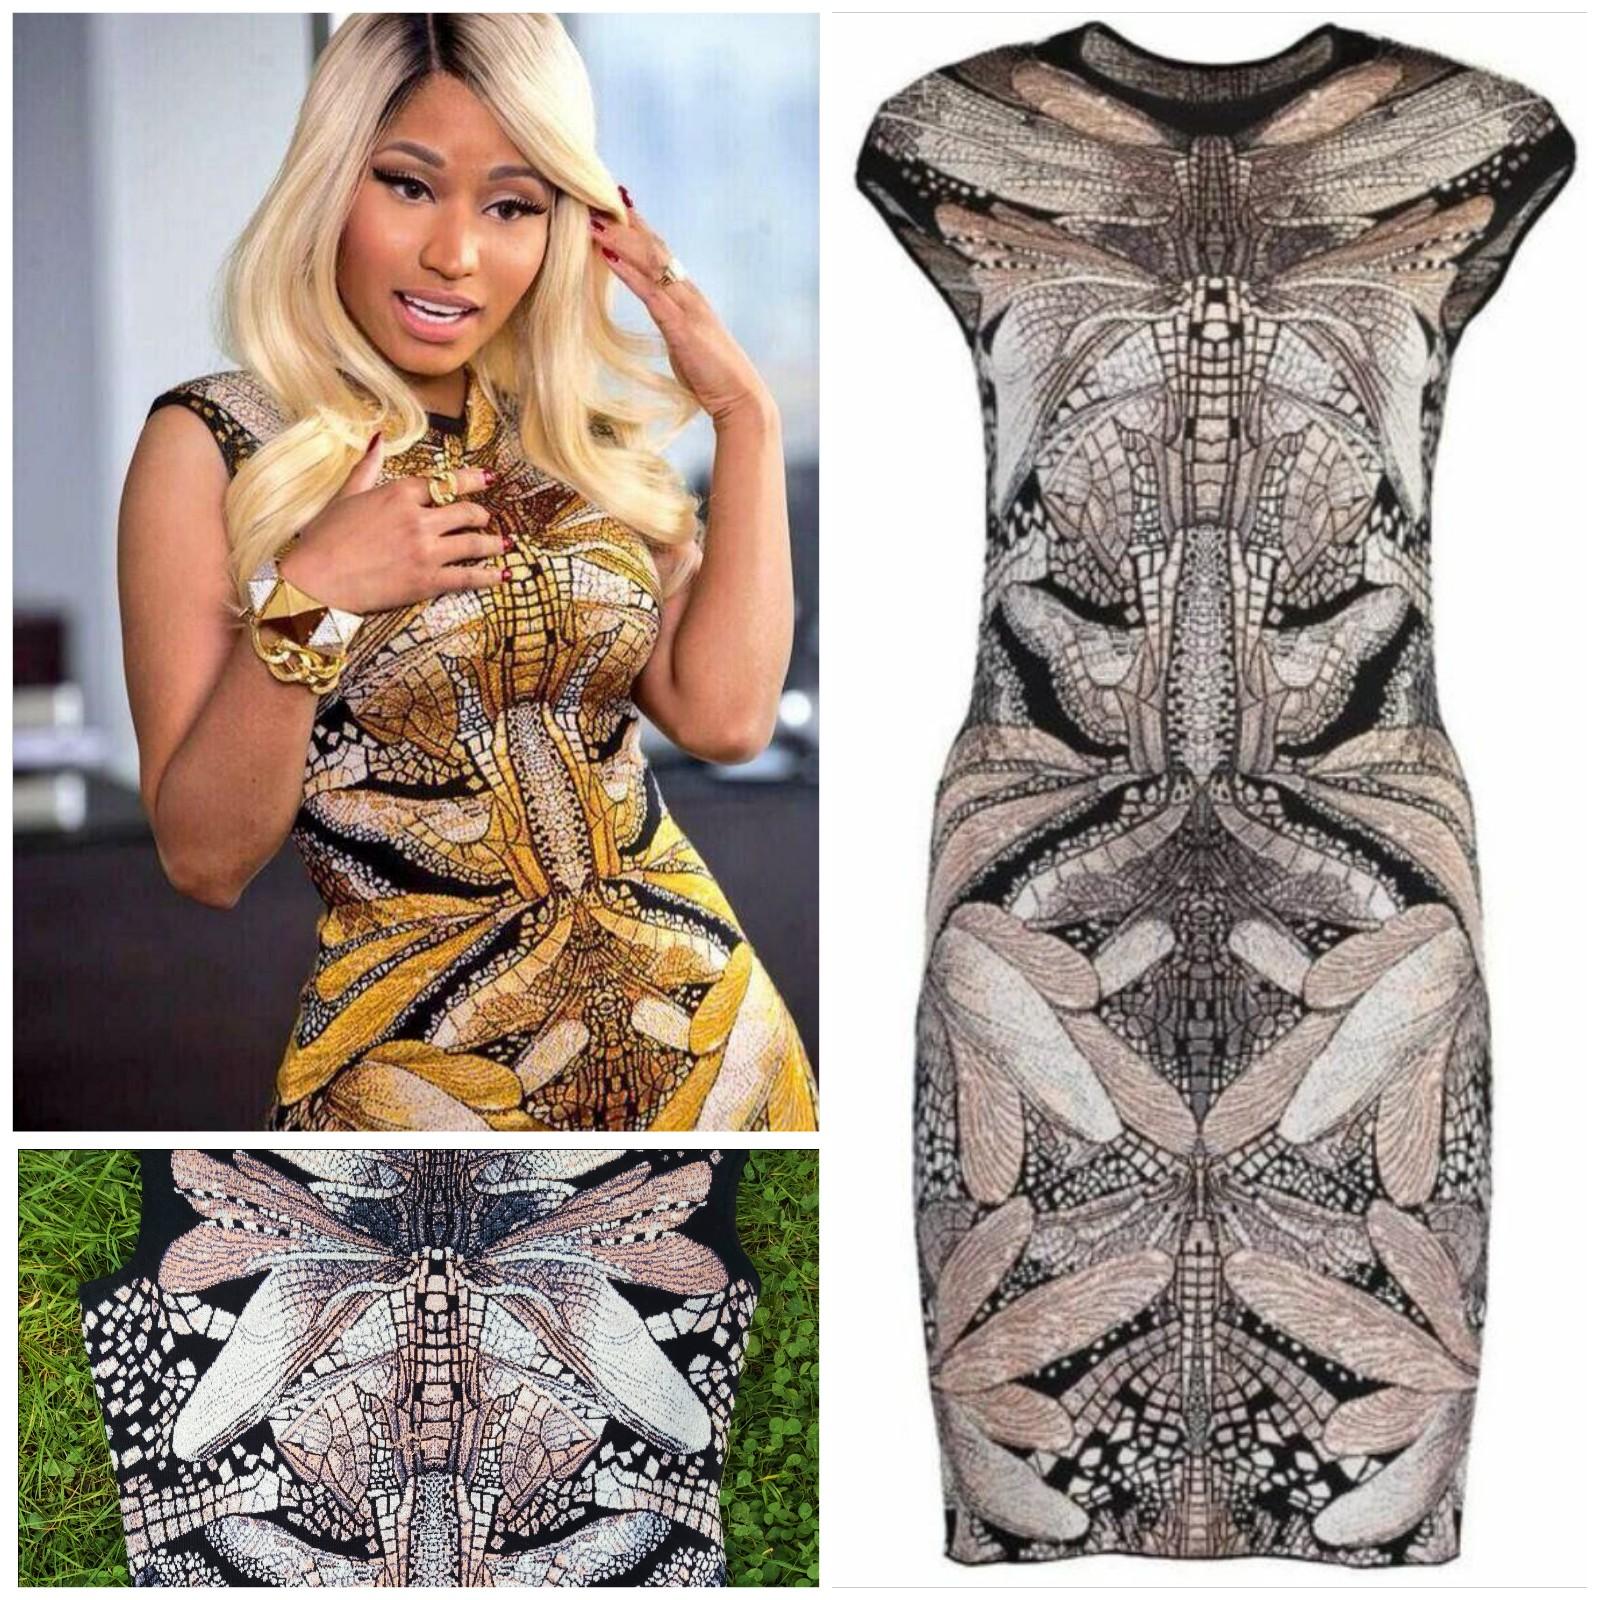 Alexander McQueen Dragonfly Dress.

The twin of this dress made an appearance in 